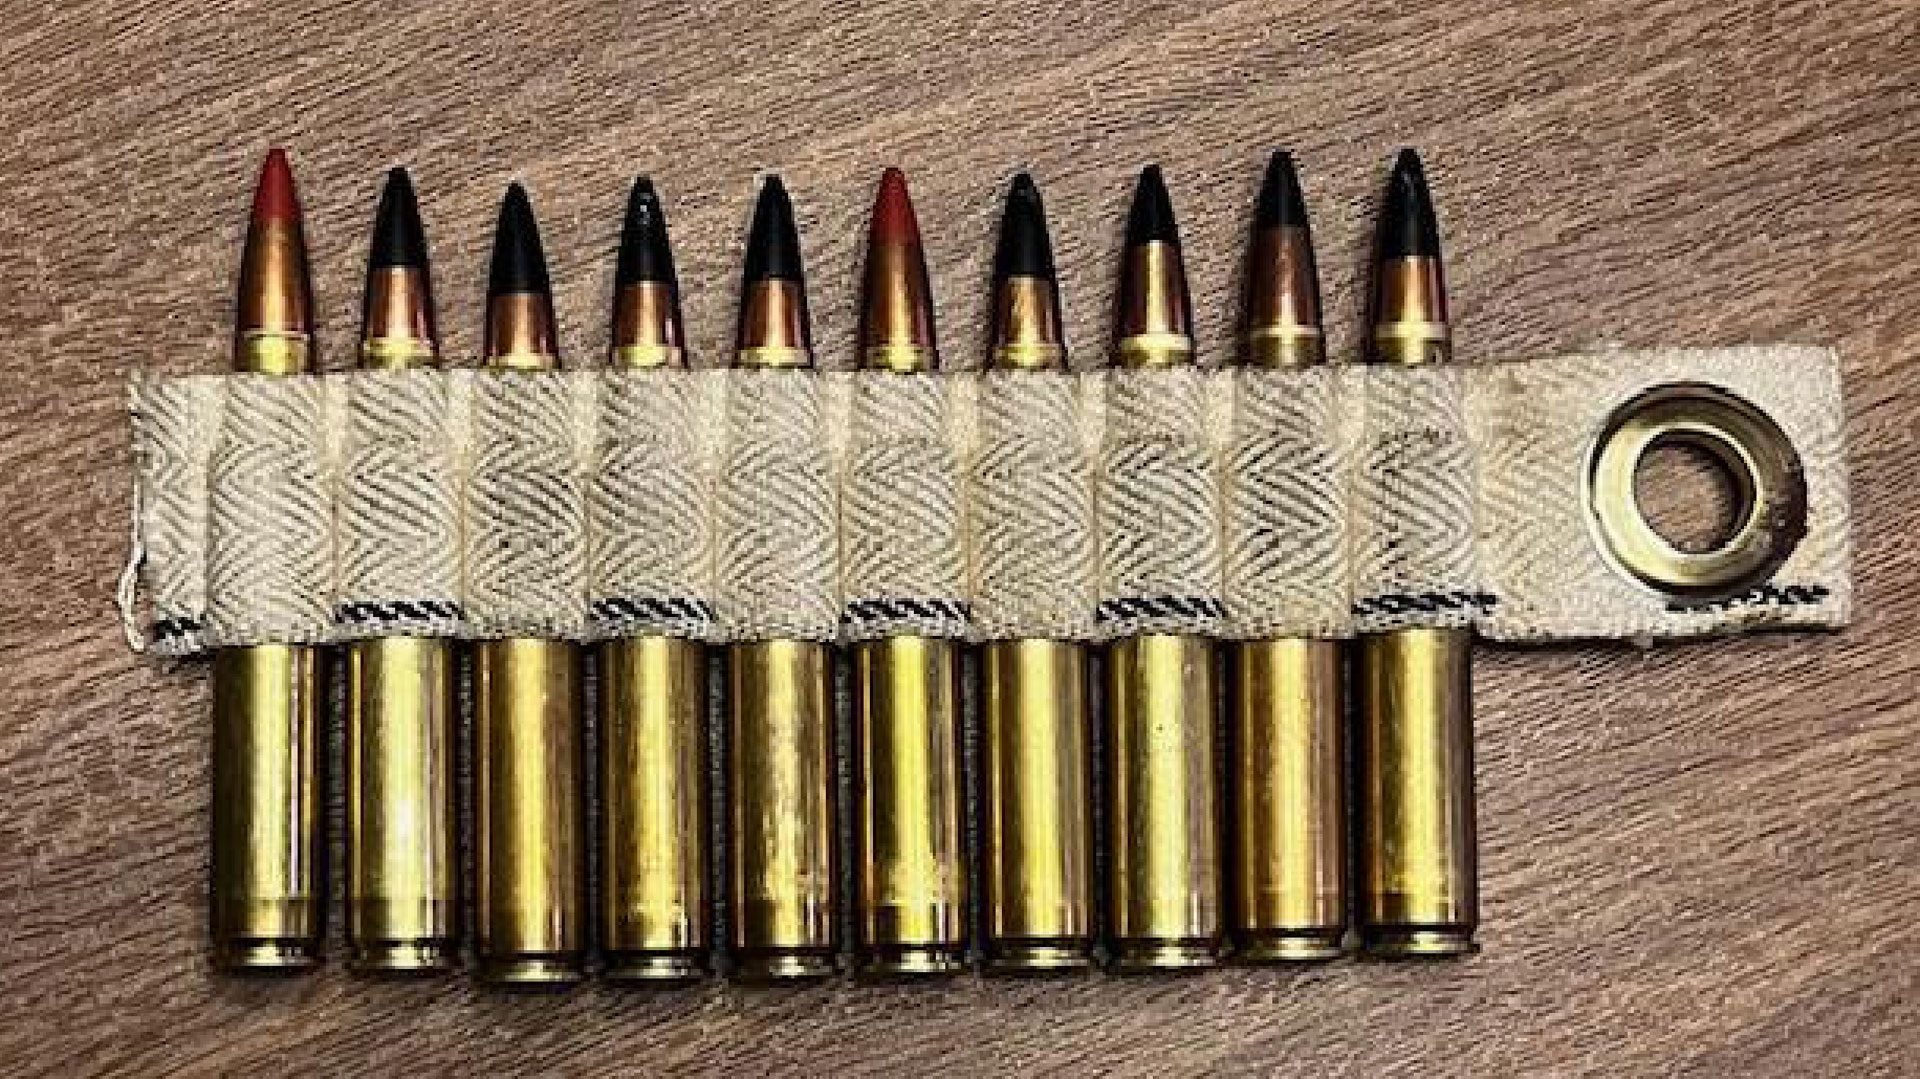 The 7mm PRC: Hornady's New Offering Fits Right Into Family of Innovative  Modern Hunting Cartridges - Safari Club